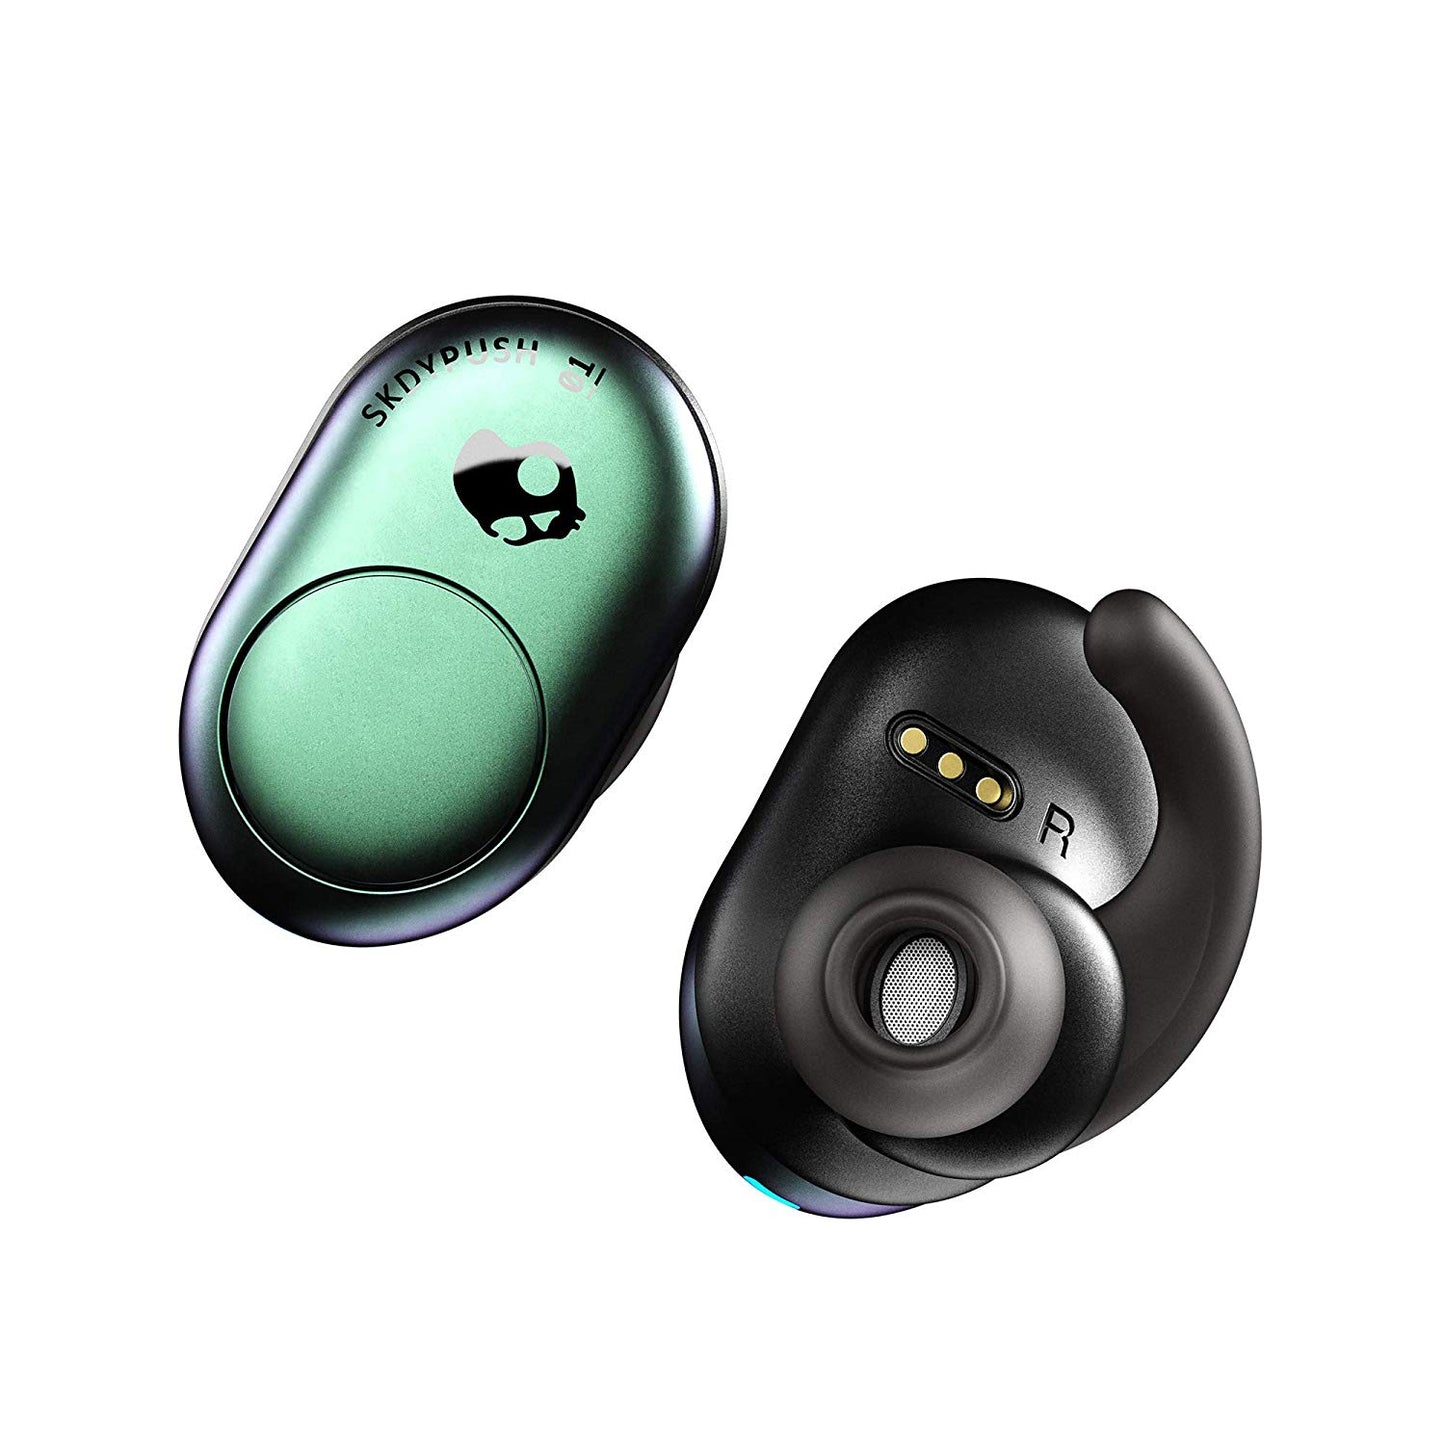 Skullcandy Push Bluetooth True Wireless Earbuds with Active Assistant